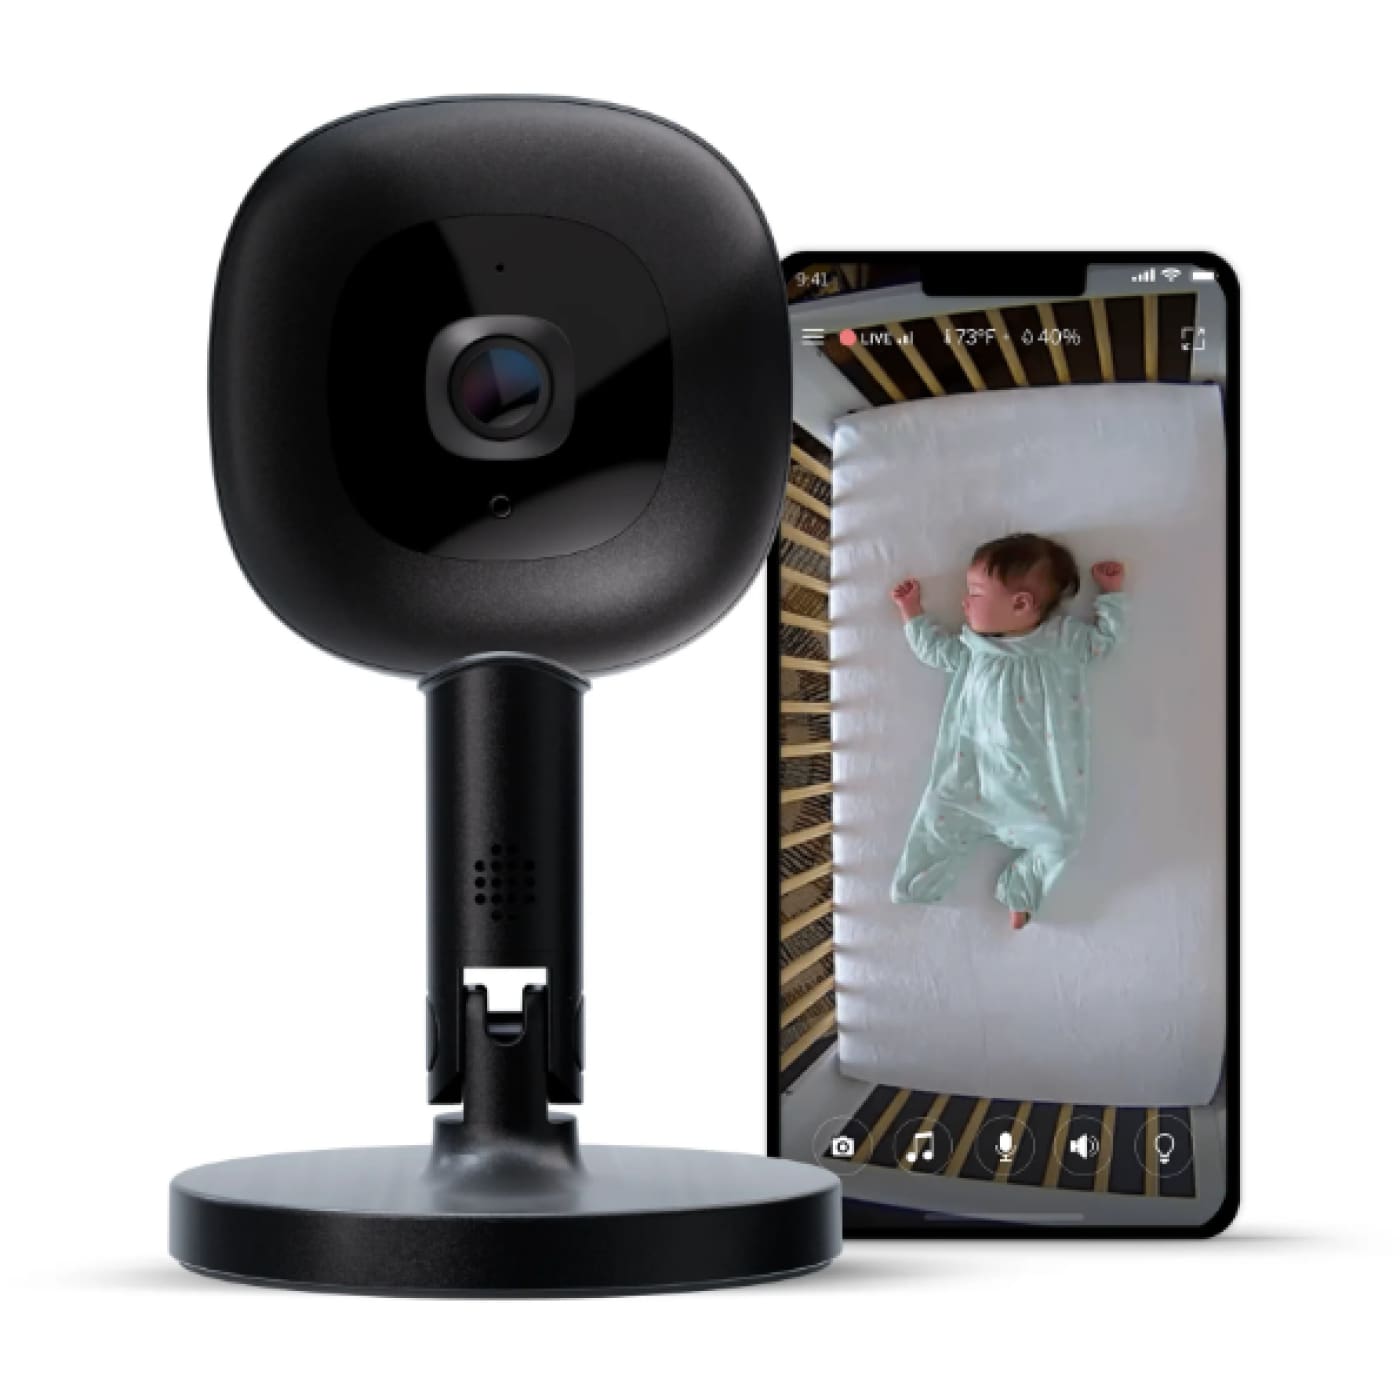 Nanit Flex Stand - Black - HEALTH & HOME SAFETY - BABY MONITORS